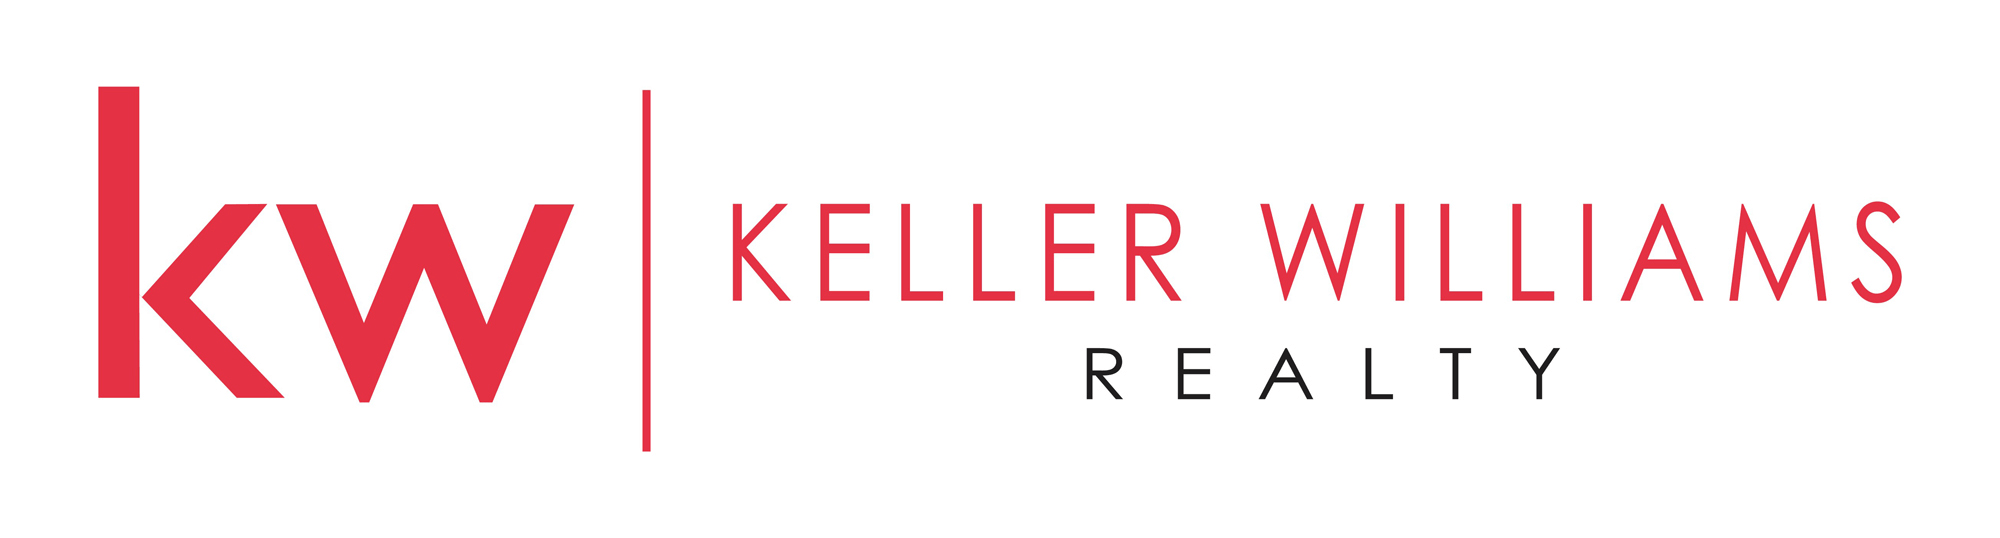 Keller Williams Realty logo in red with 'kw' initials on a white background.